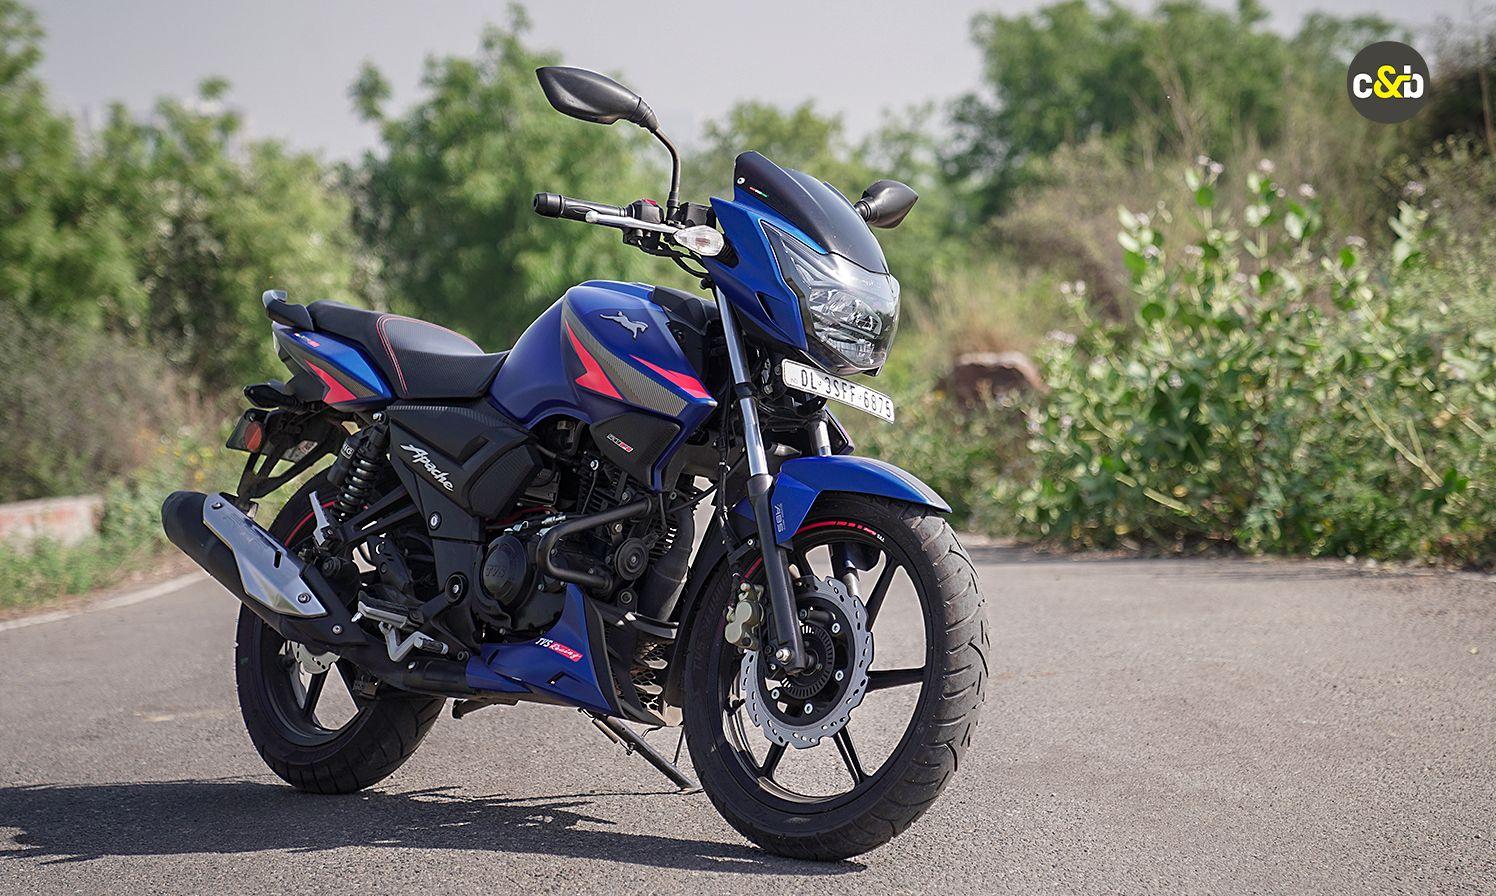 Latest Reviews on Apache RTR 160 